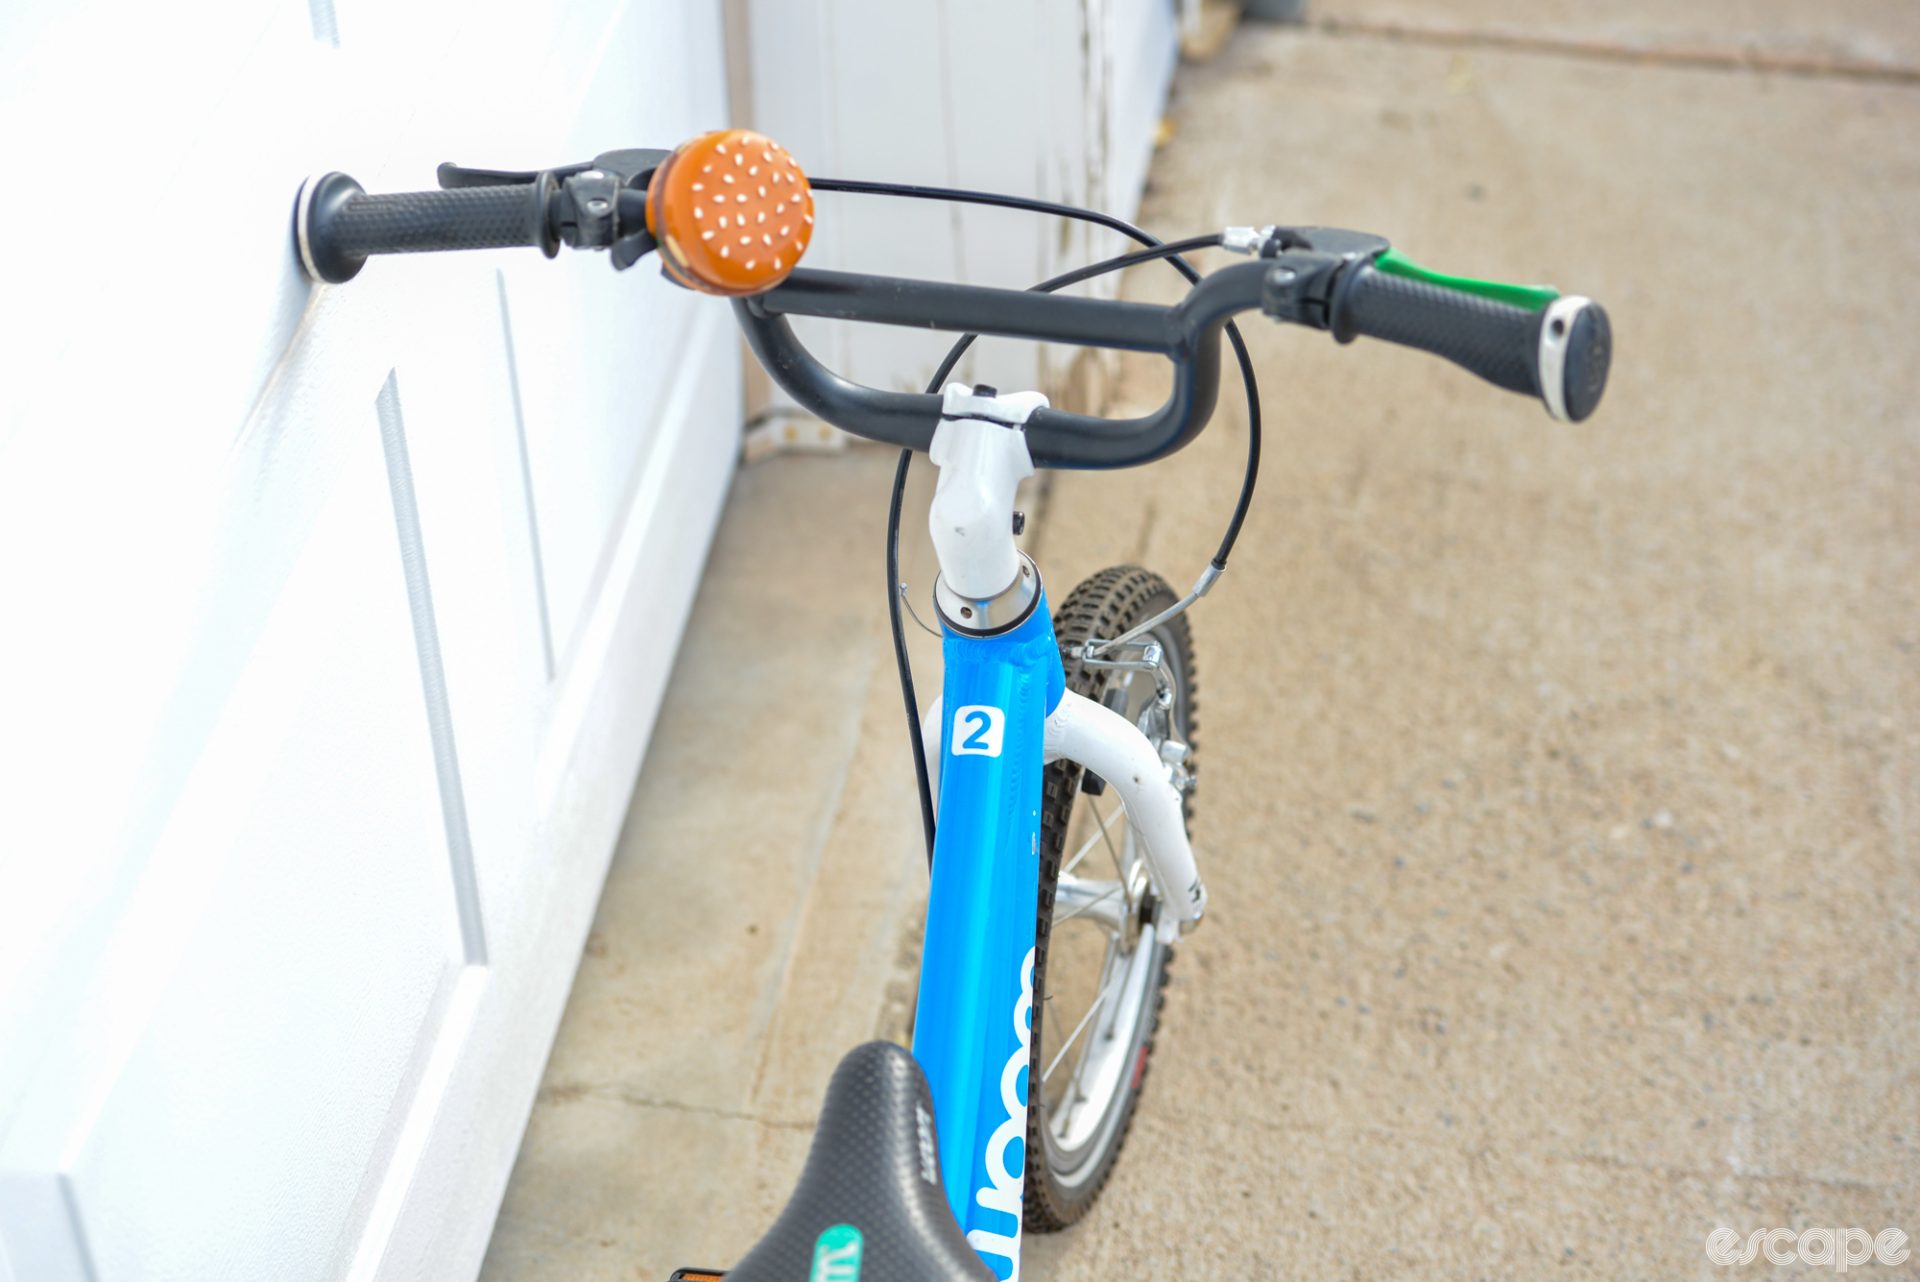 The Woom from the top showing the BMX-style handlebar and a hamburger-stylized bike bell.